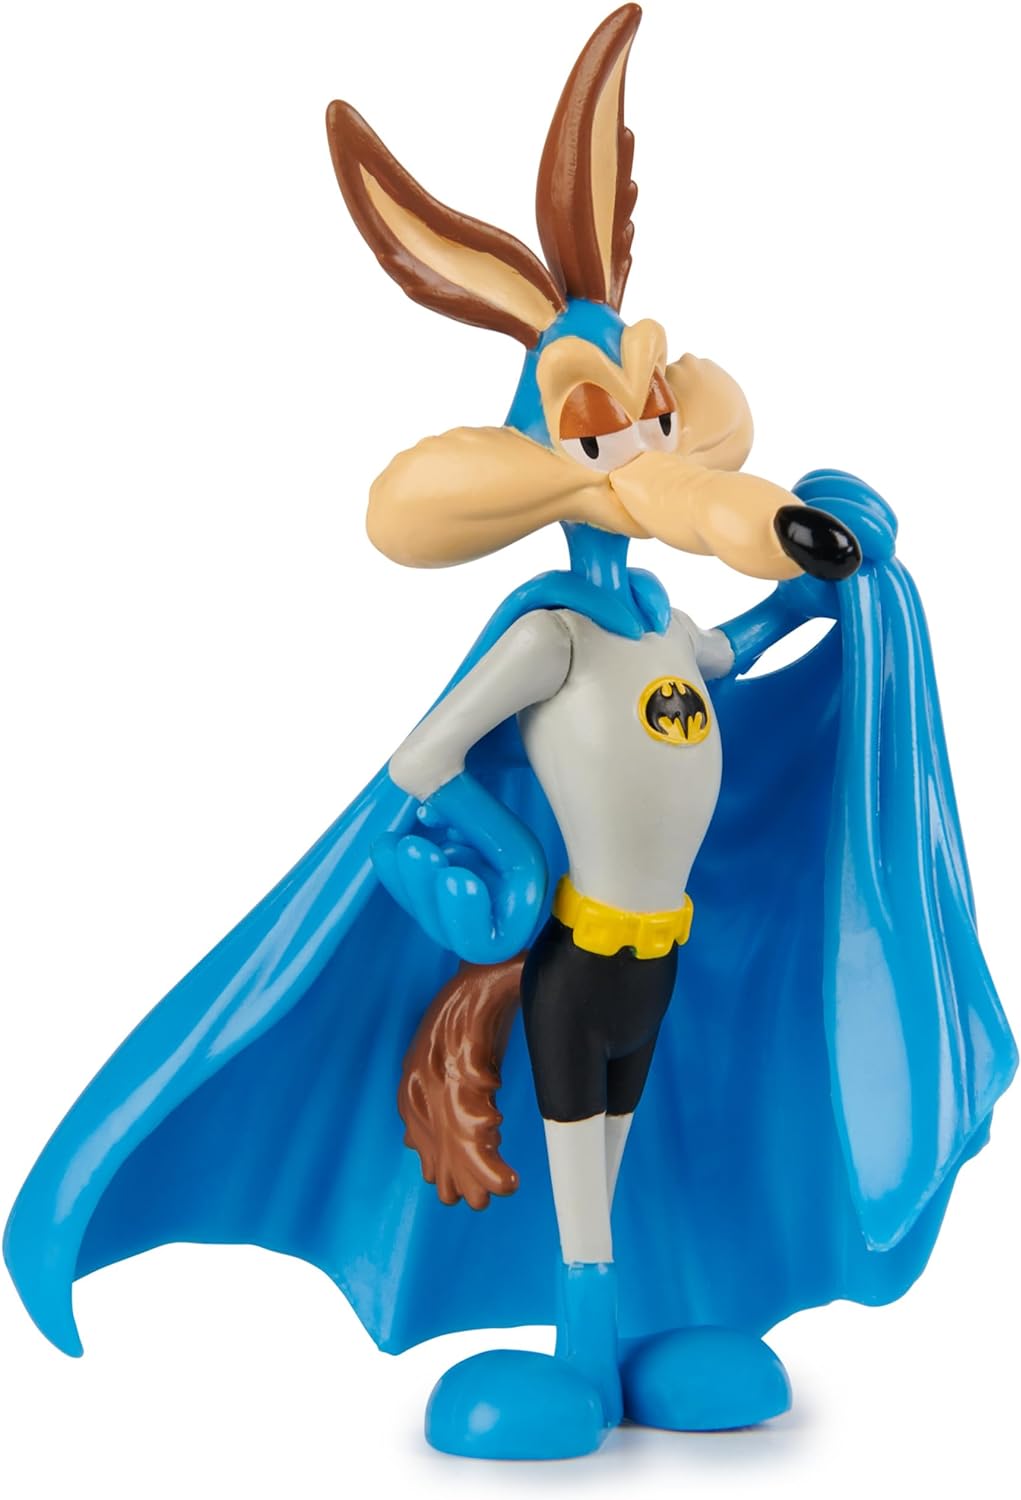 Spin Master DC Comics, Looney Tunes Mash-Up 4-Inch Figure 5- Pack